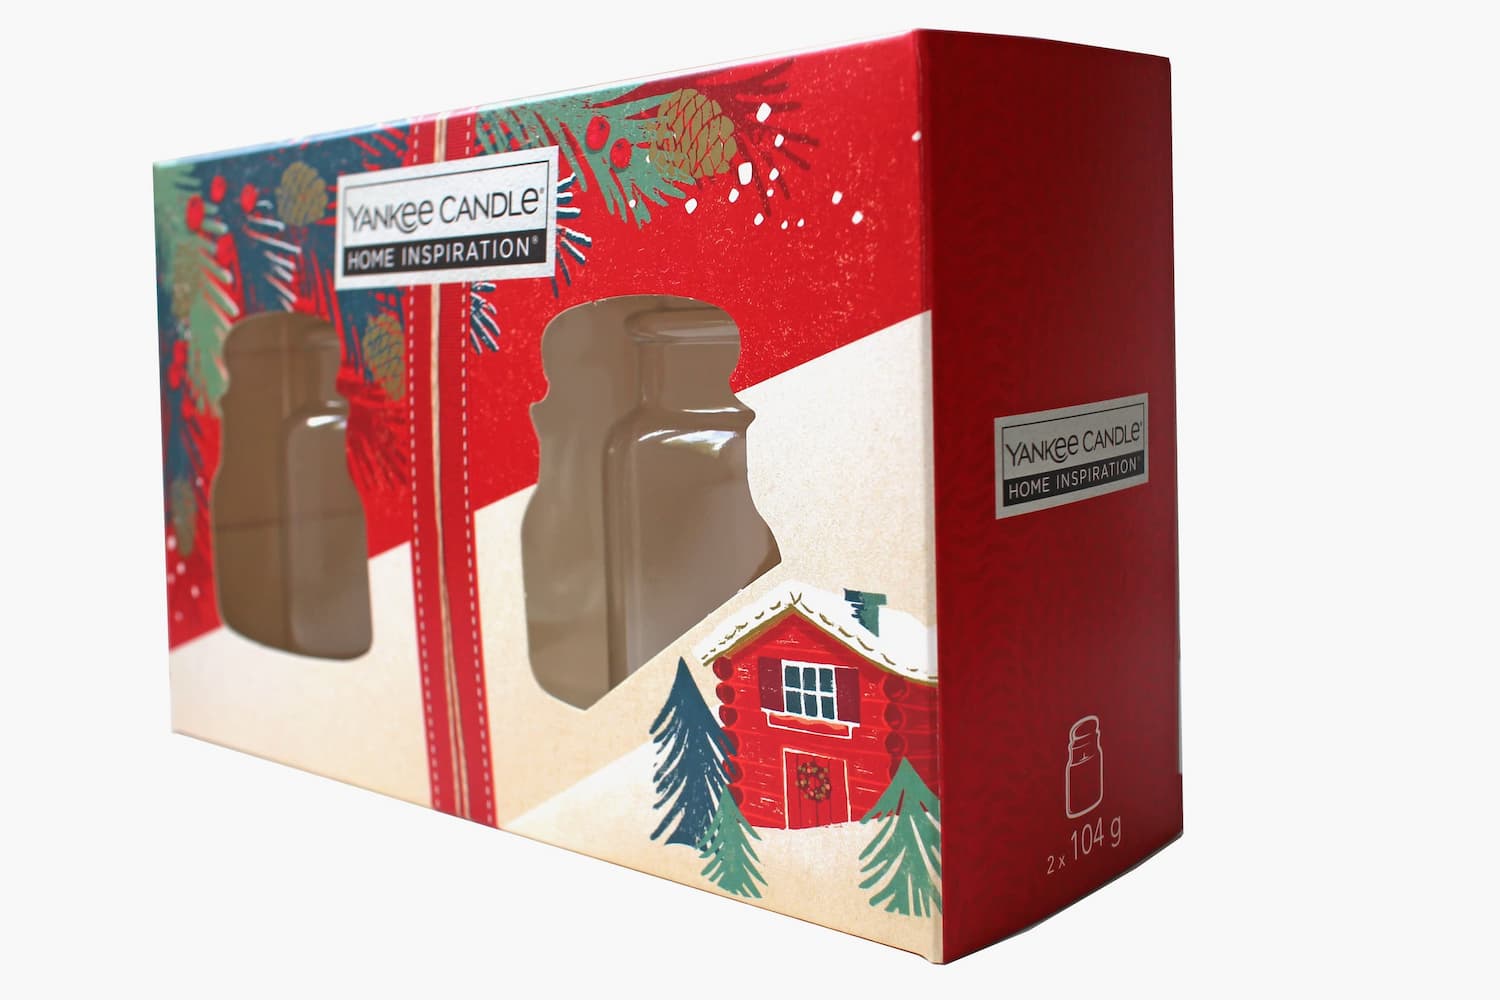 Yankee candle box packaging in a chirstmassy design